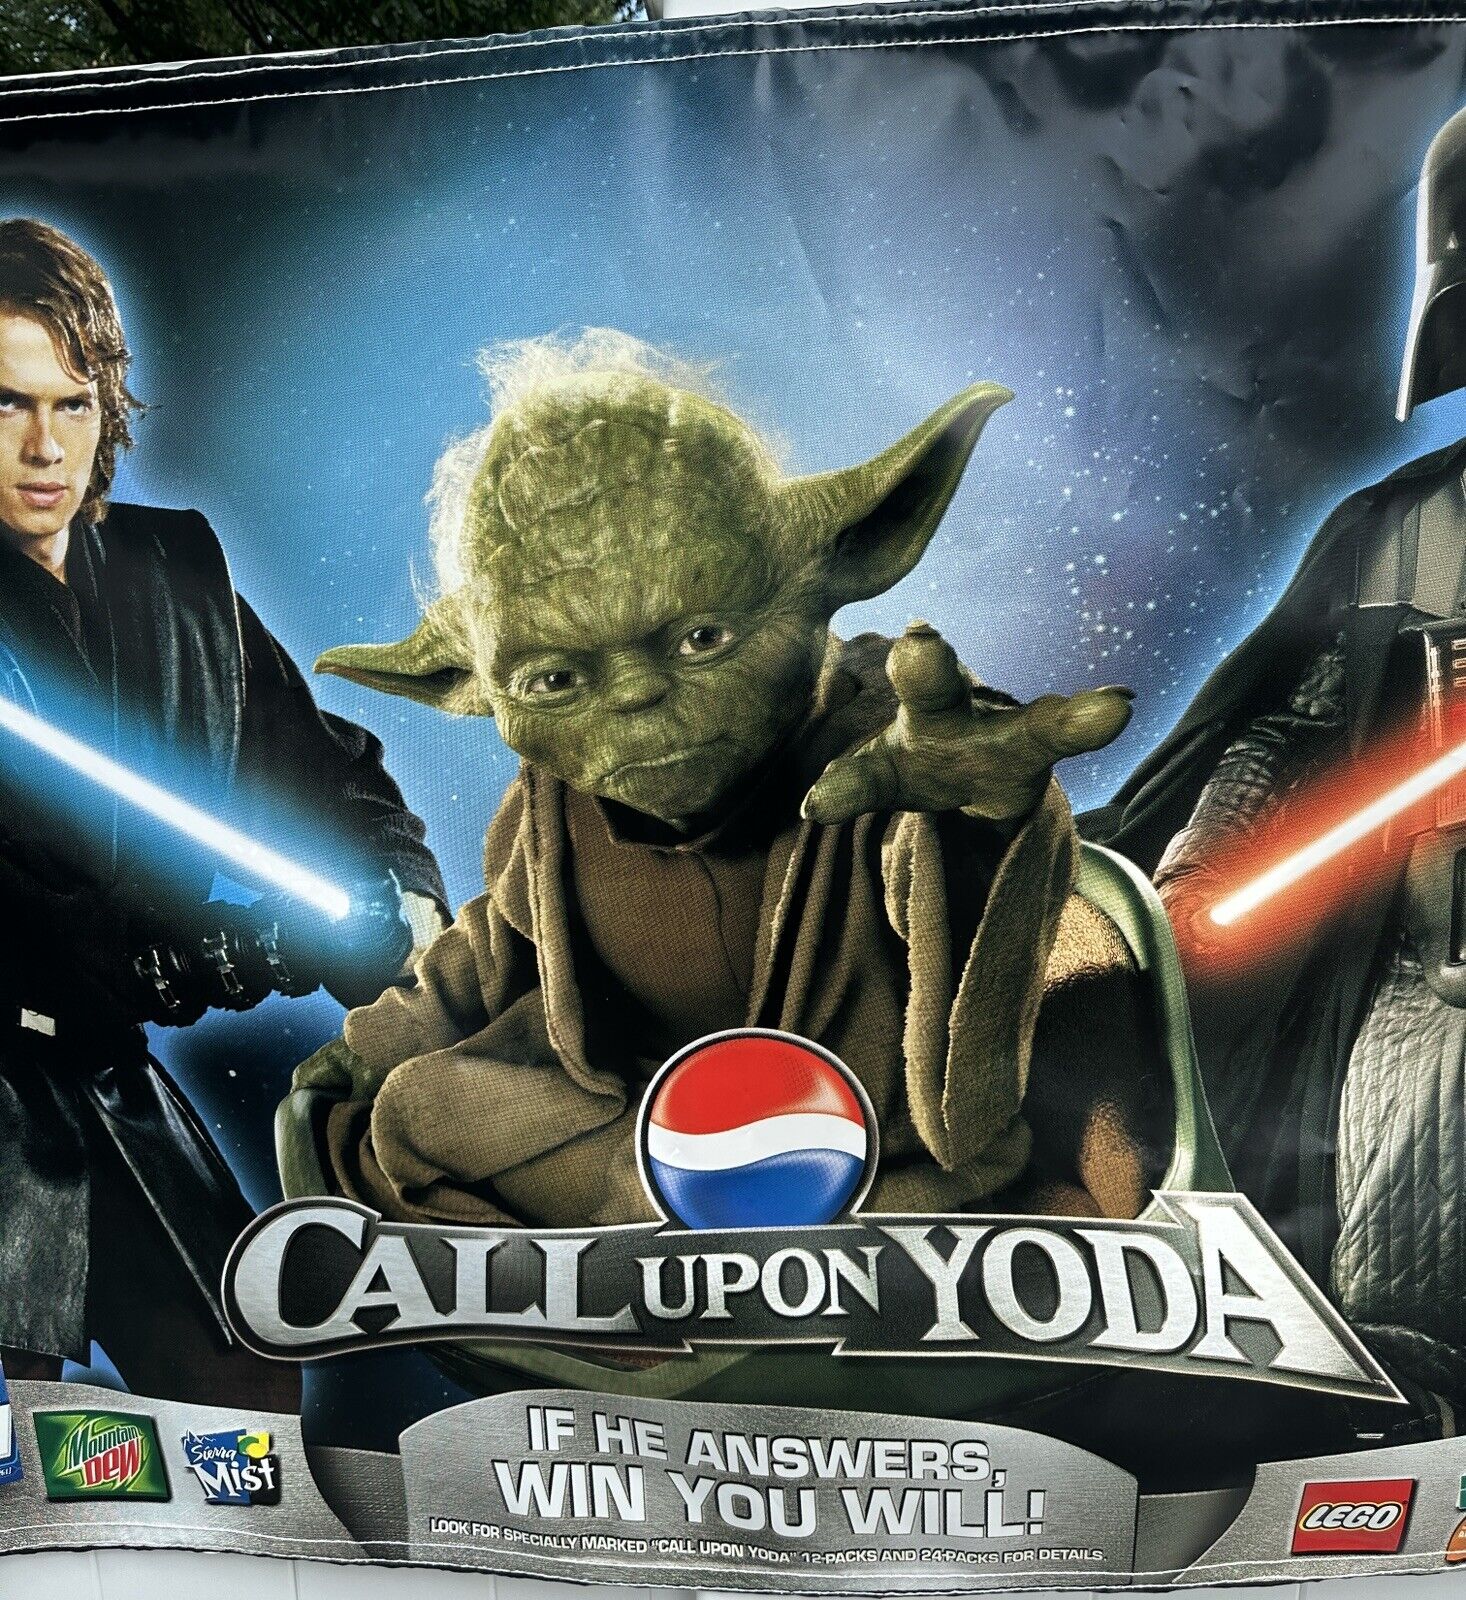 Star Wars “Call Upon Yoda” Pepsi Advertising Banner 8 Ft x 3 Ft Sign (and More)